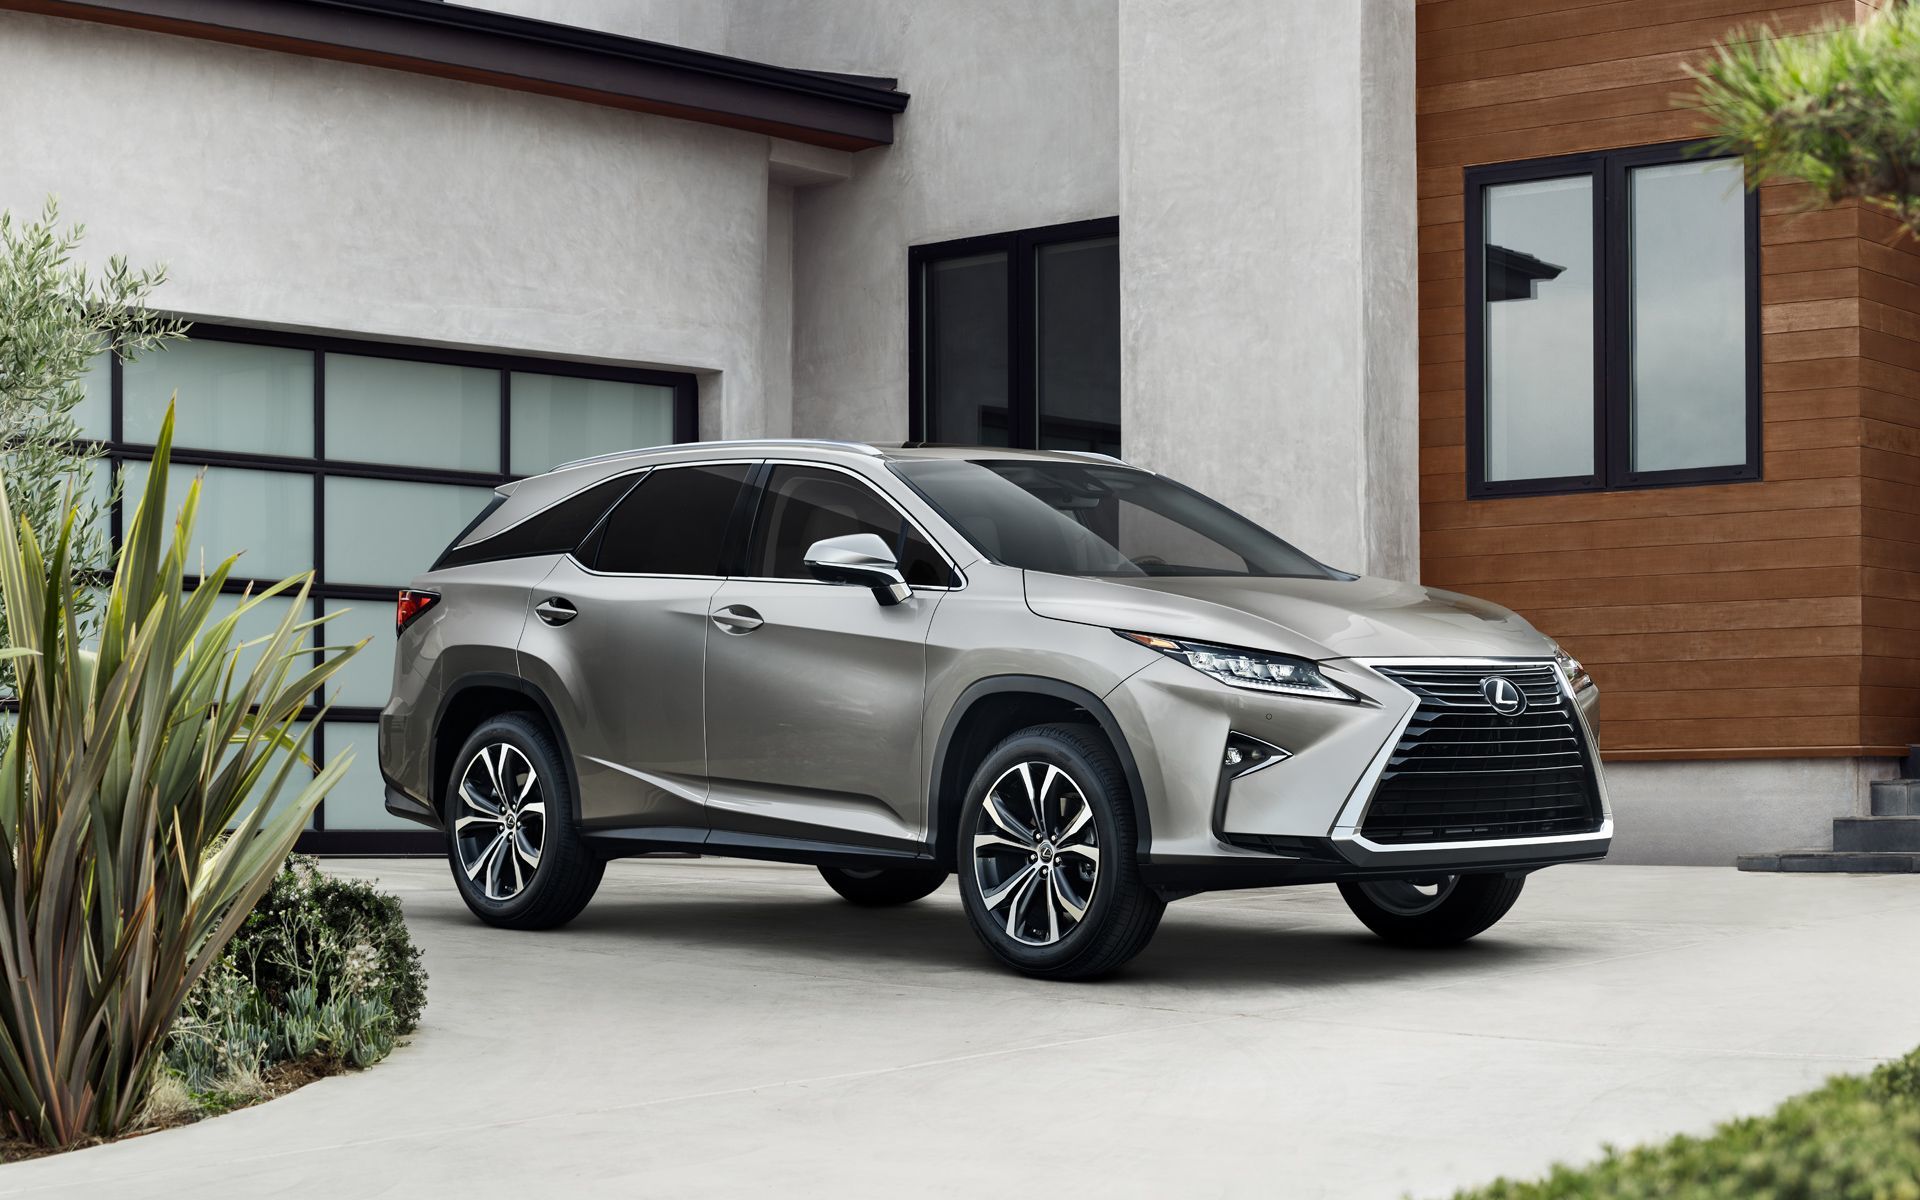 The 2019 Lexus RX Crossover: Luxury Performance and Technology